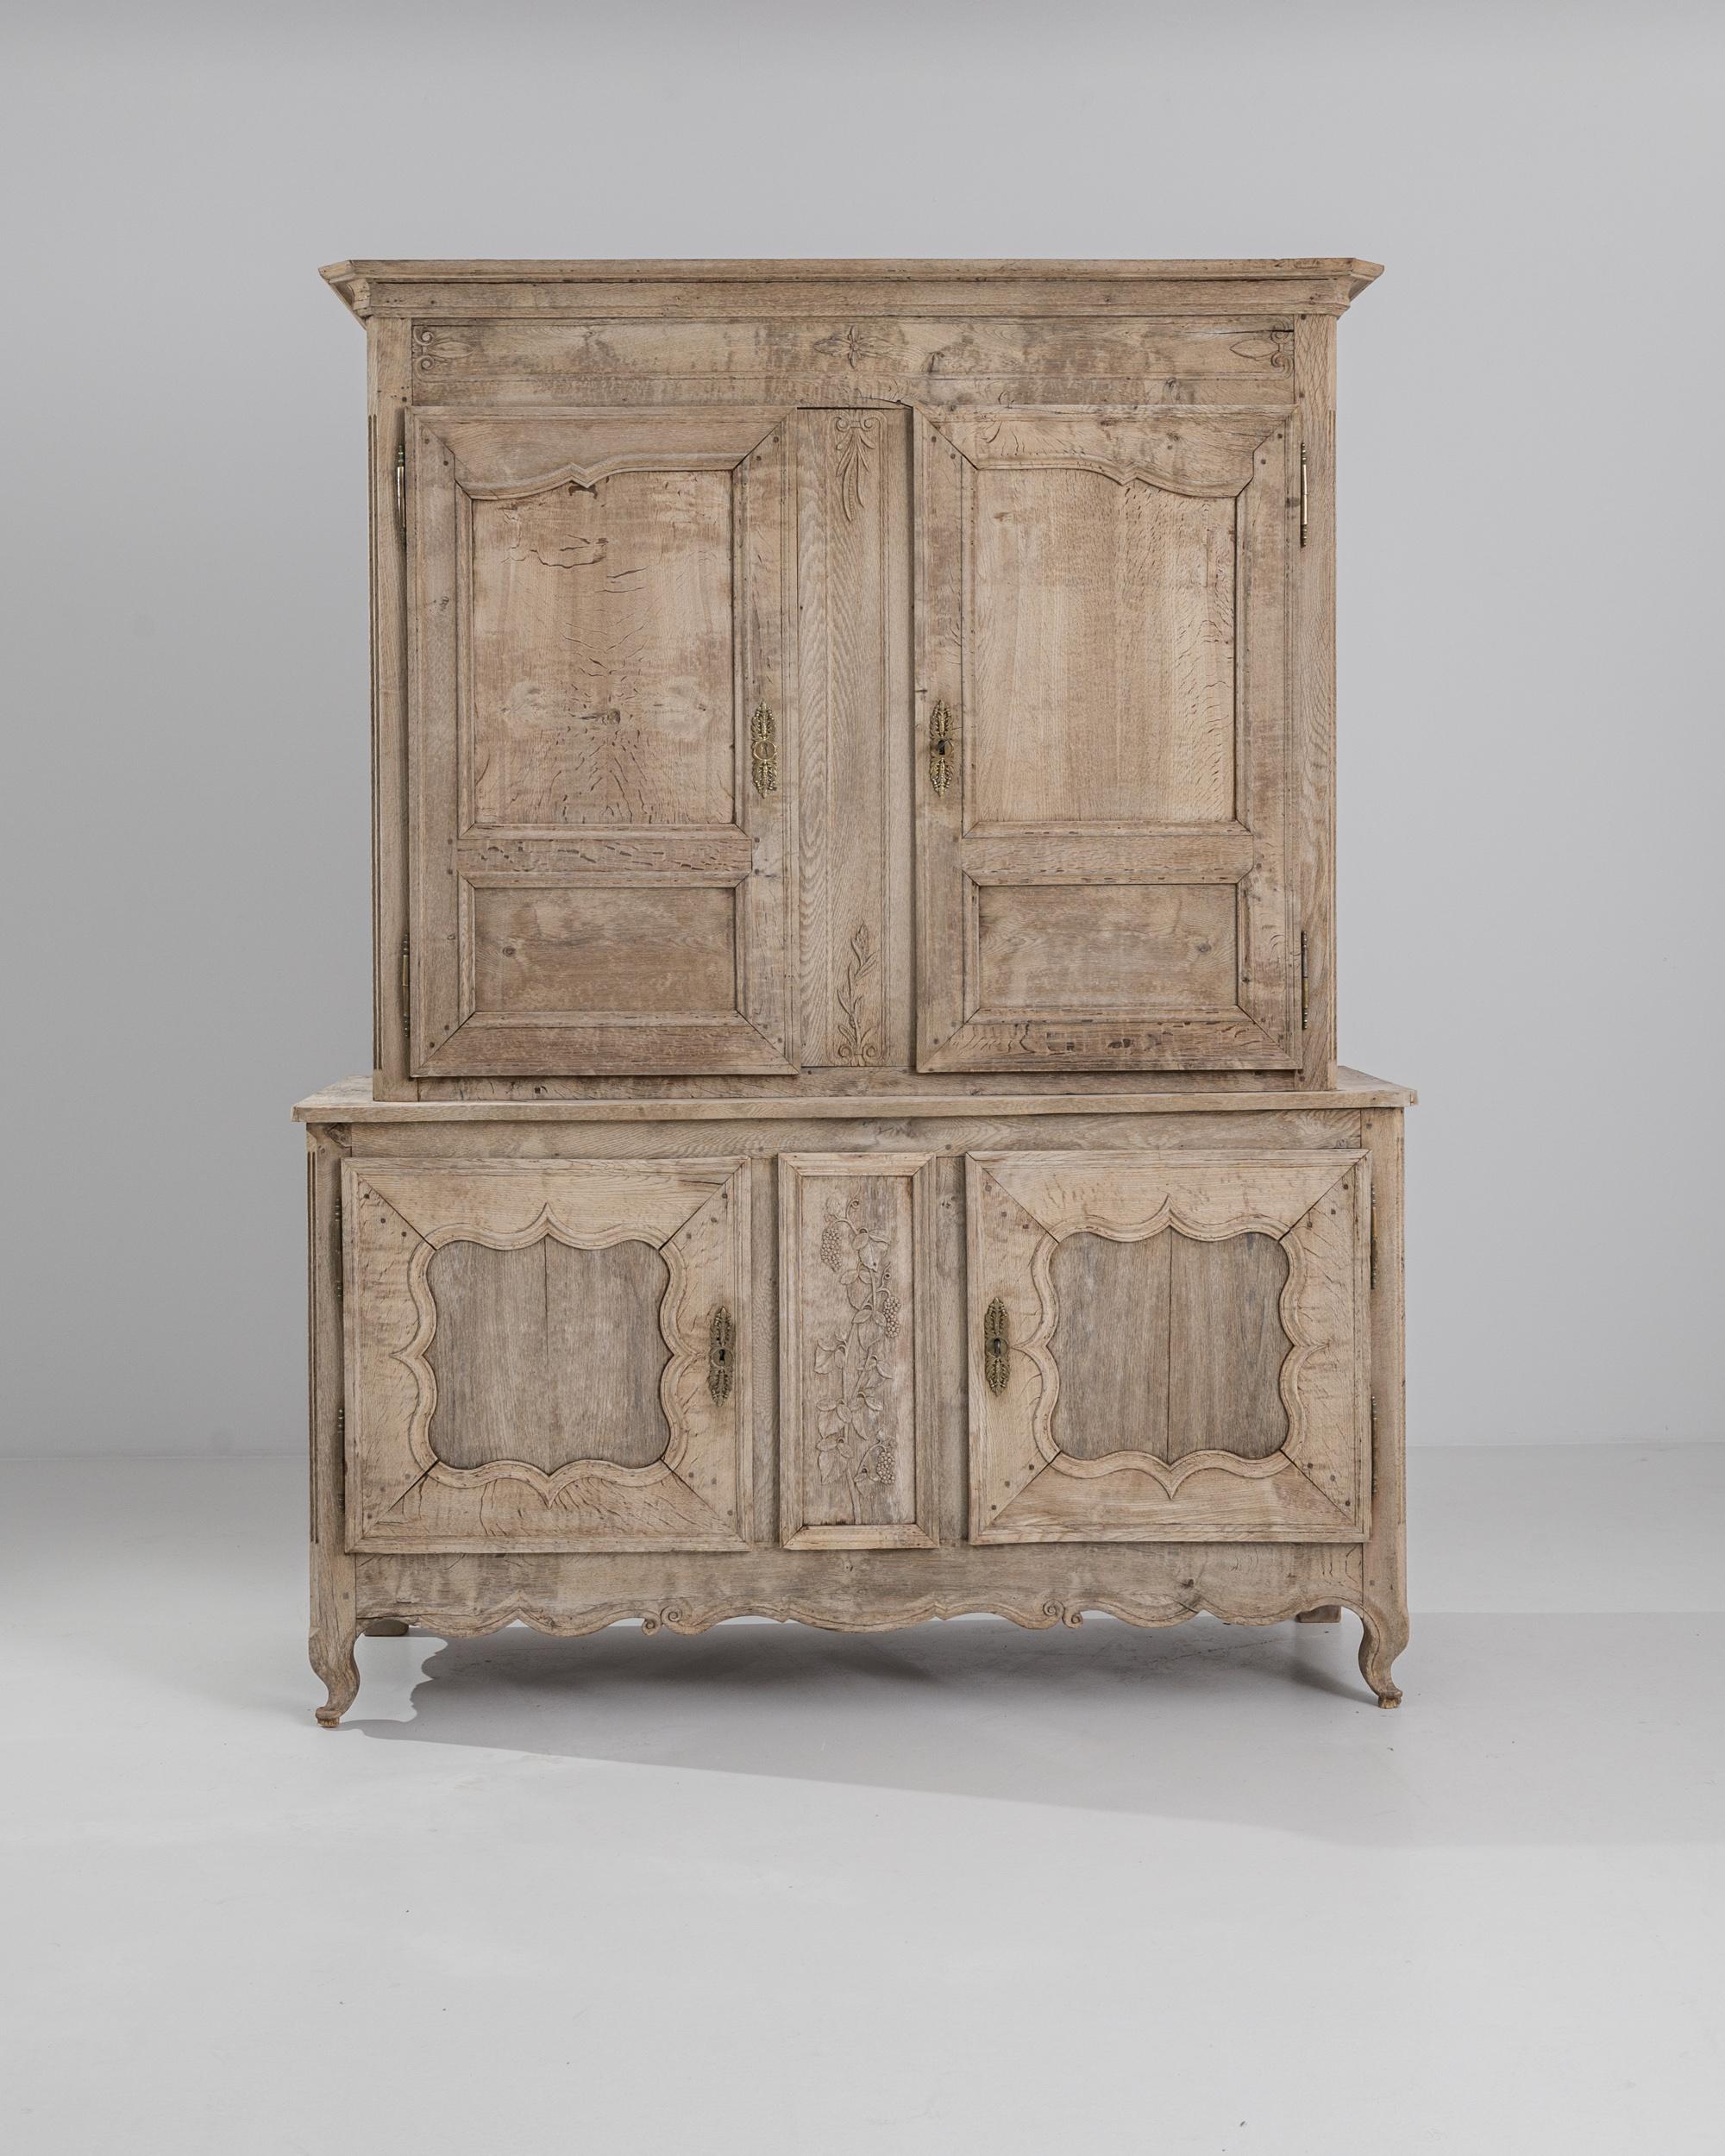 The quintessential French Provincial buffet cabinet, made circa 1800. The simple geometric shape recalls a countryside local and the time tested approach of regional French cabinet makers. A two door base seats a tall upper cabinet, composed with